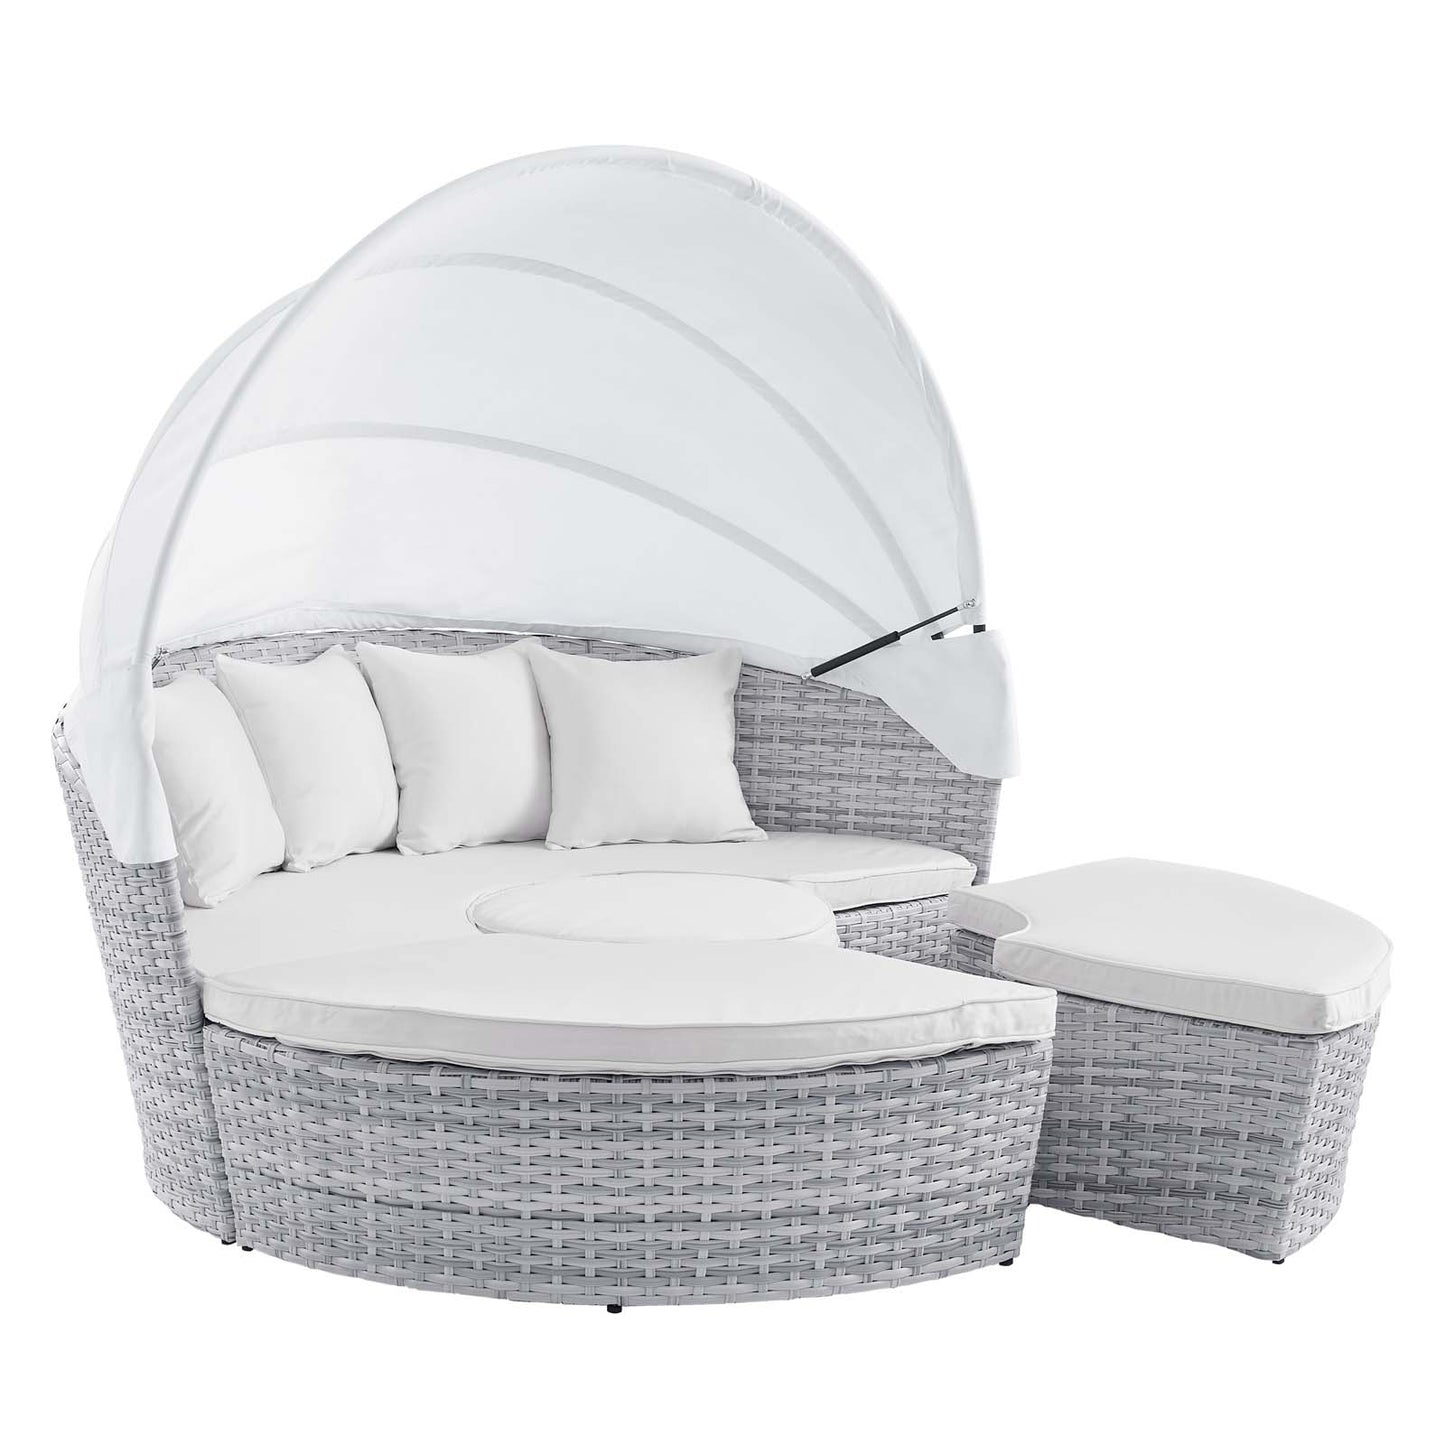 Scottsdale Canopy Outdoor Patio Daybed Light Gray White EEI-4442-LGR-WHI